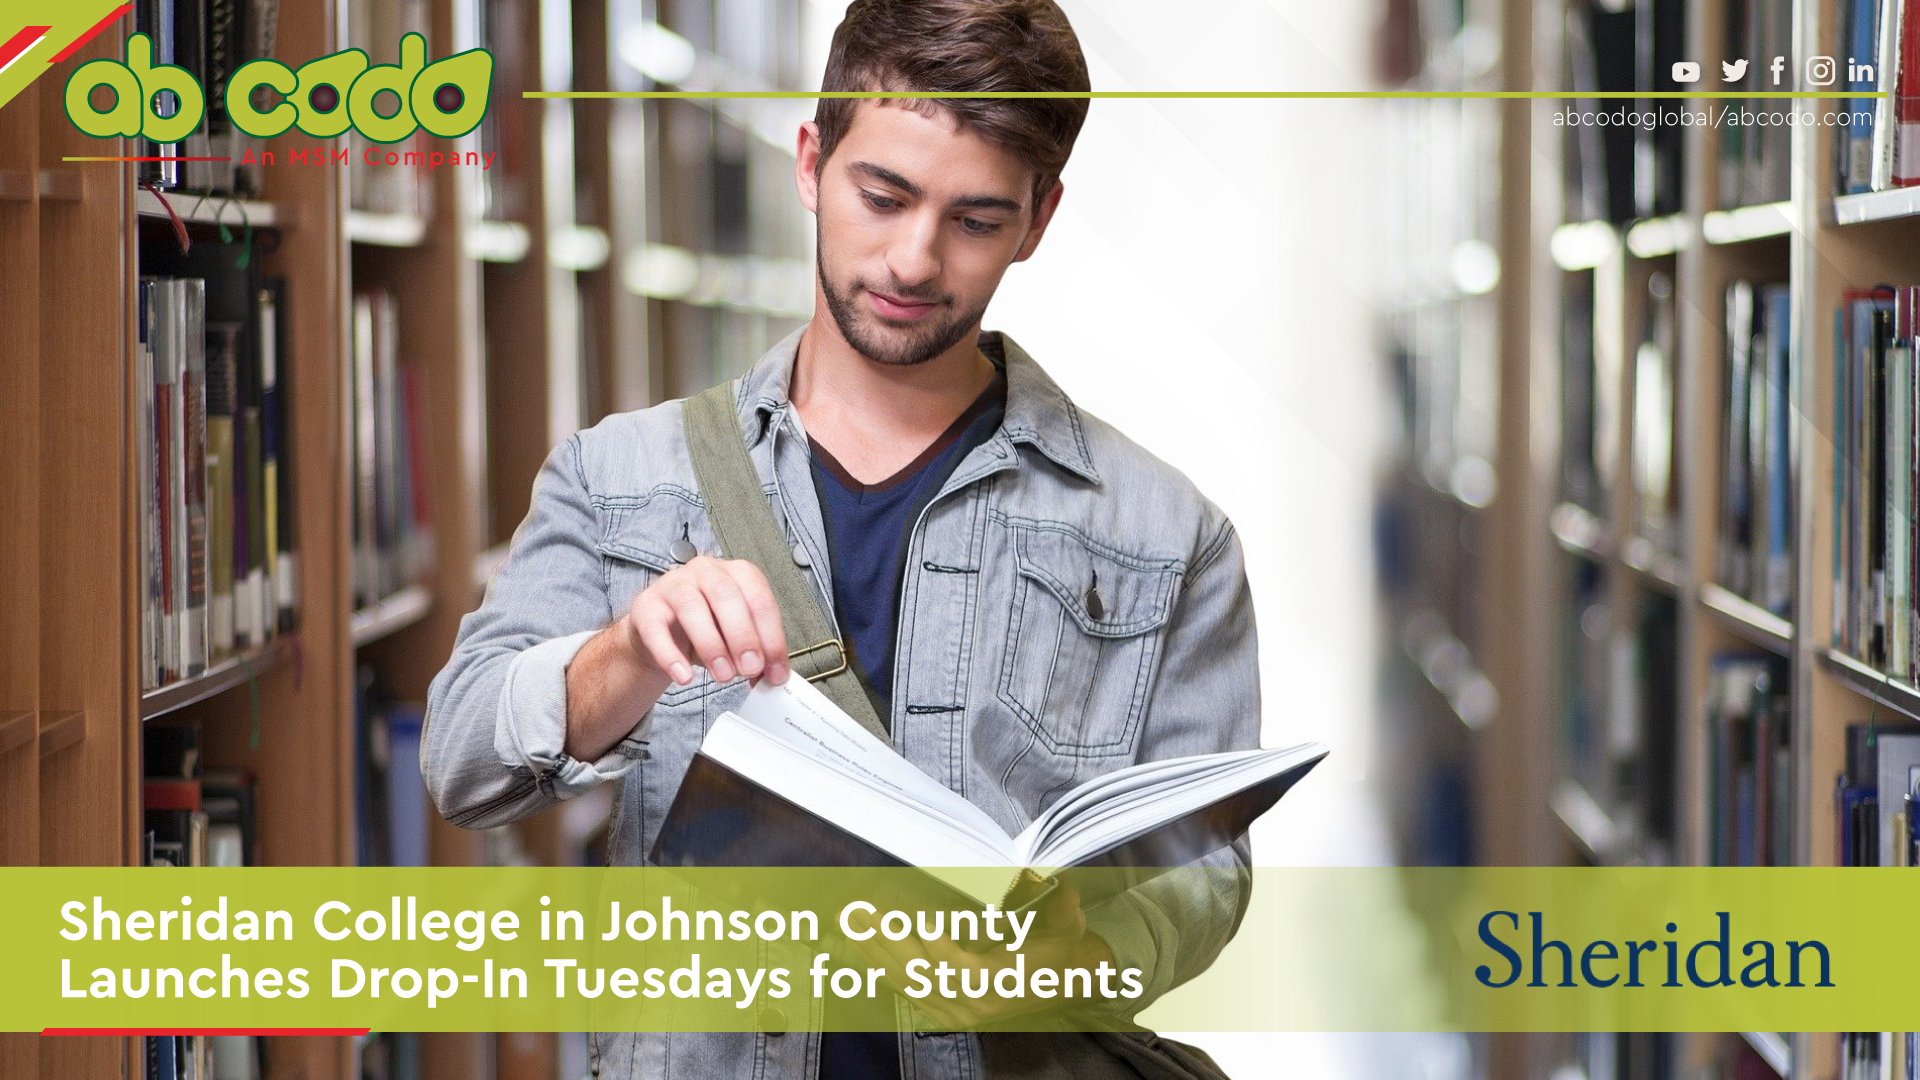 Sheridan College in Johnson County Launches Drop-In Tuesdays for Students